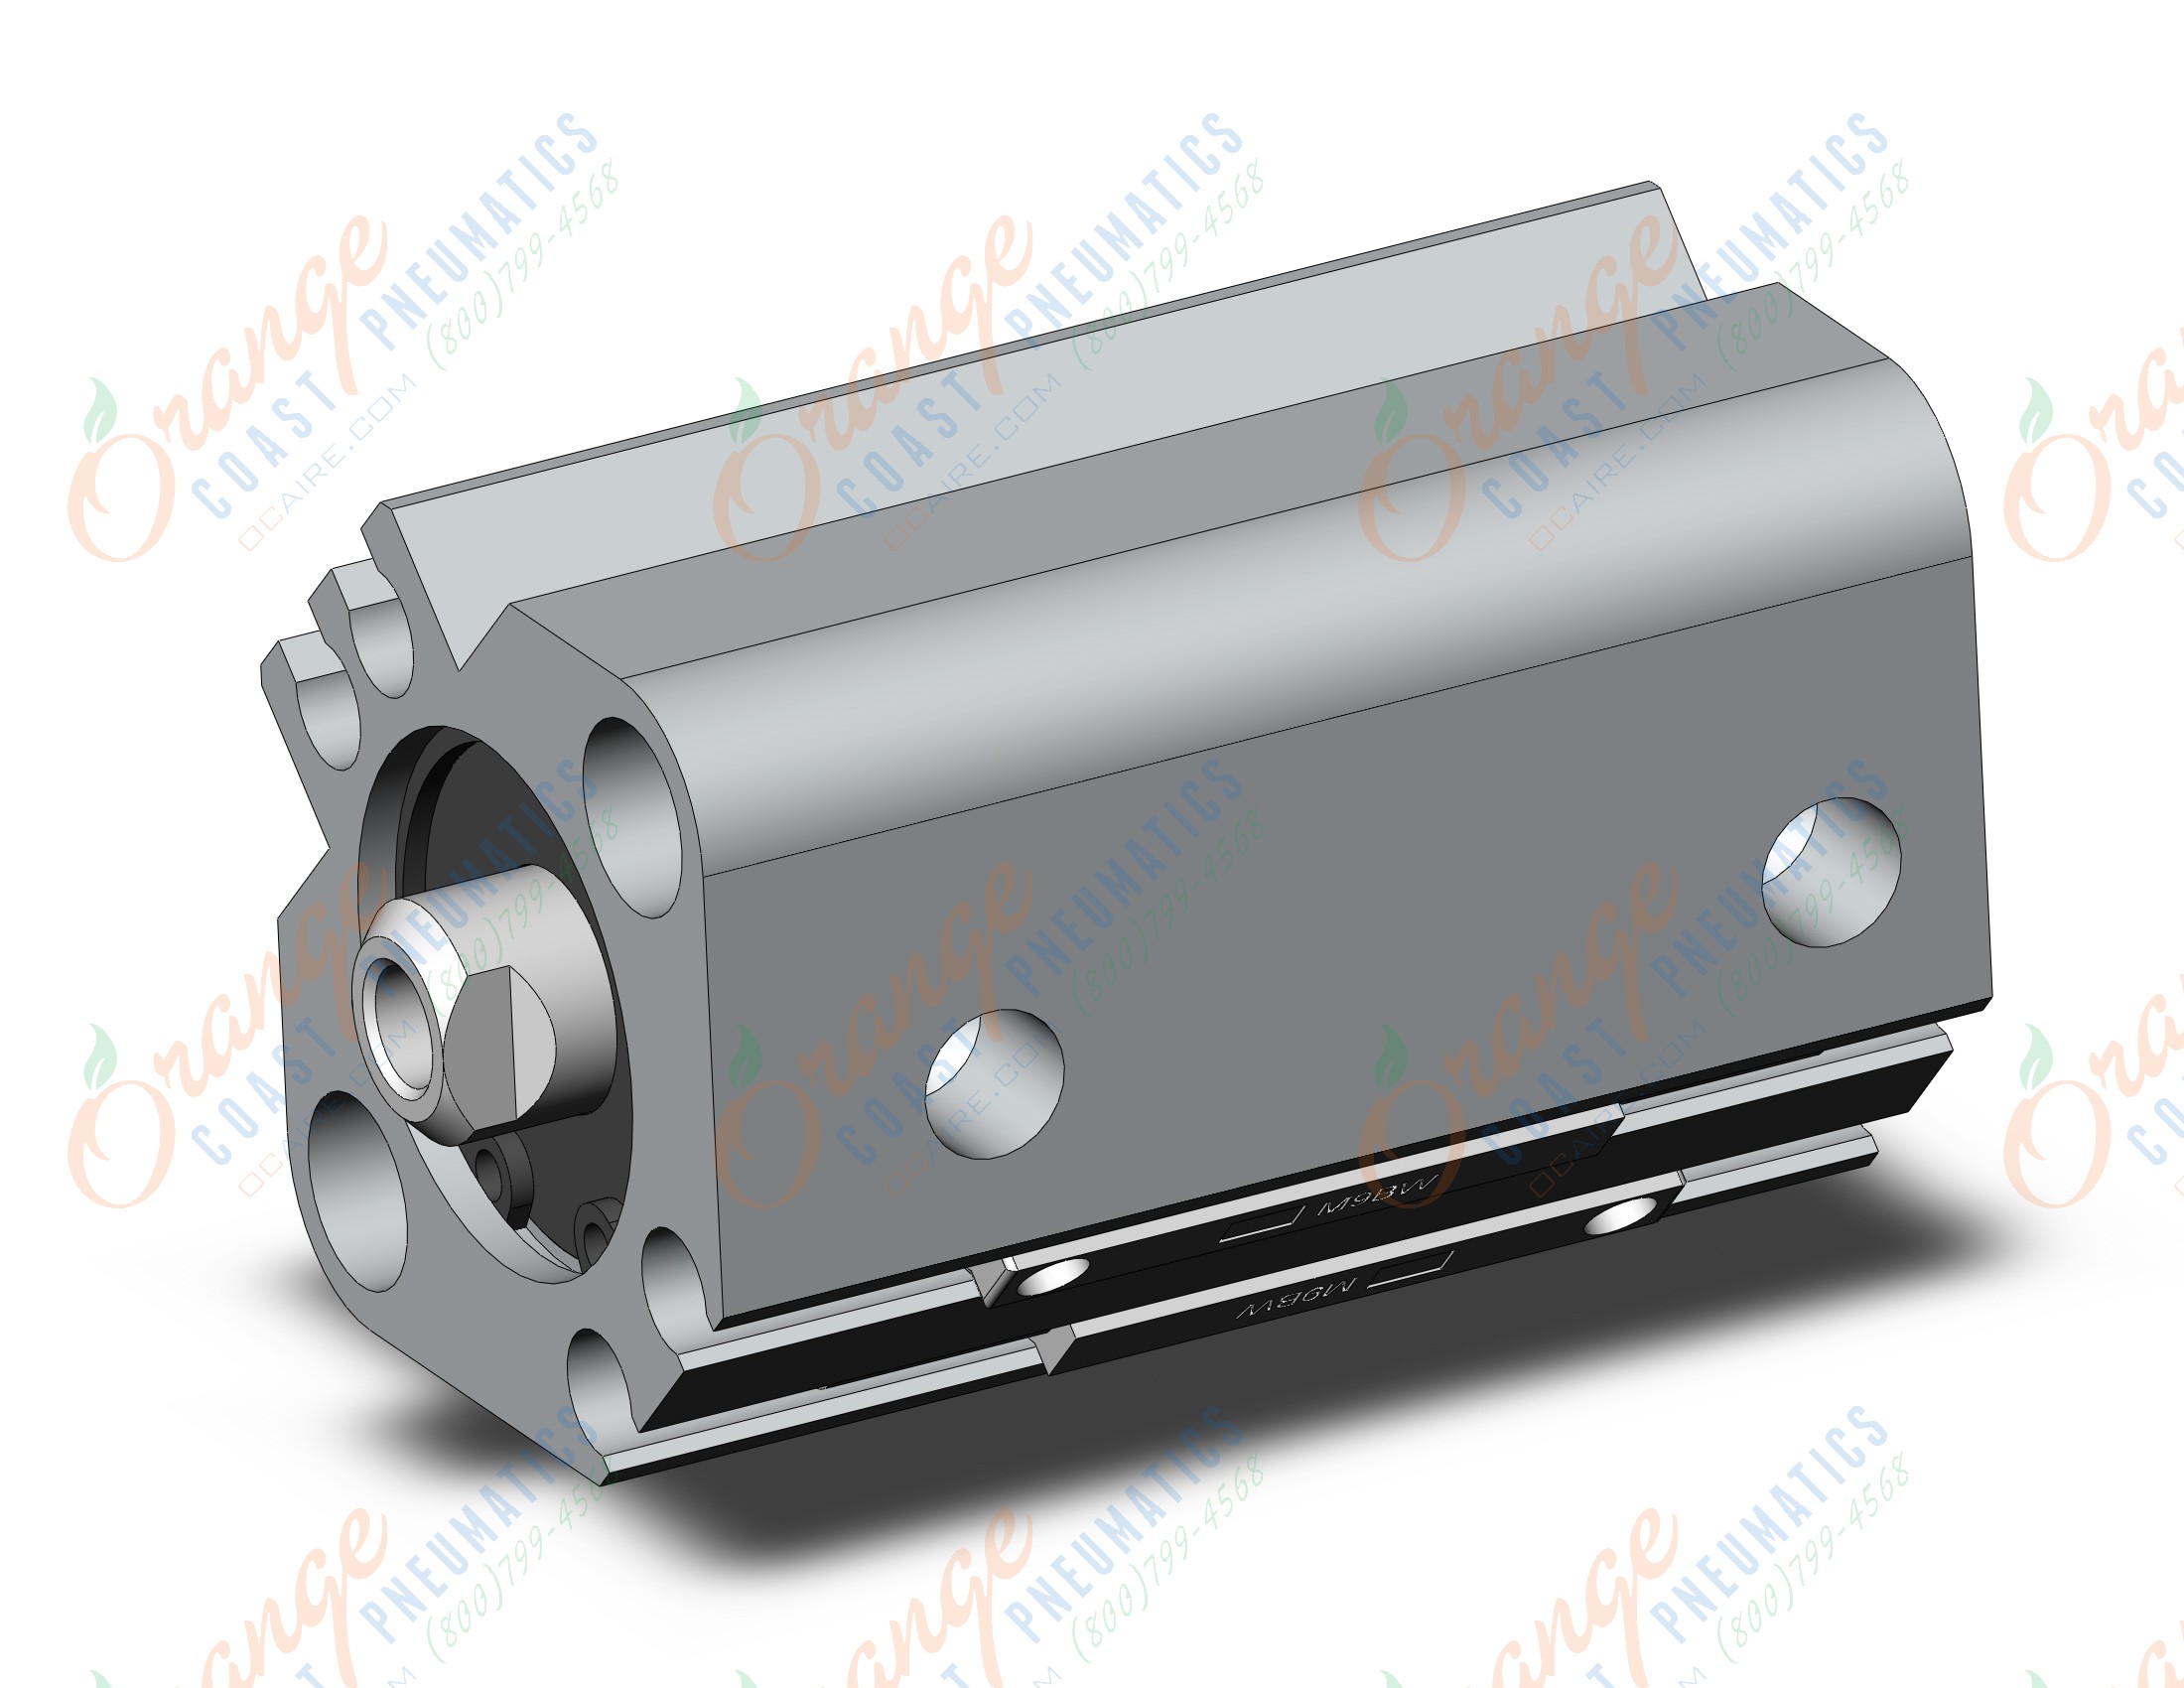 SMC CDQ2B16-15DCZ-L-M9BWL compact cylinder, cq2-z, COMPACT CYLINDER